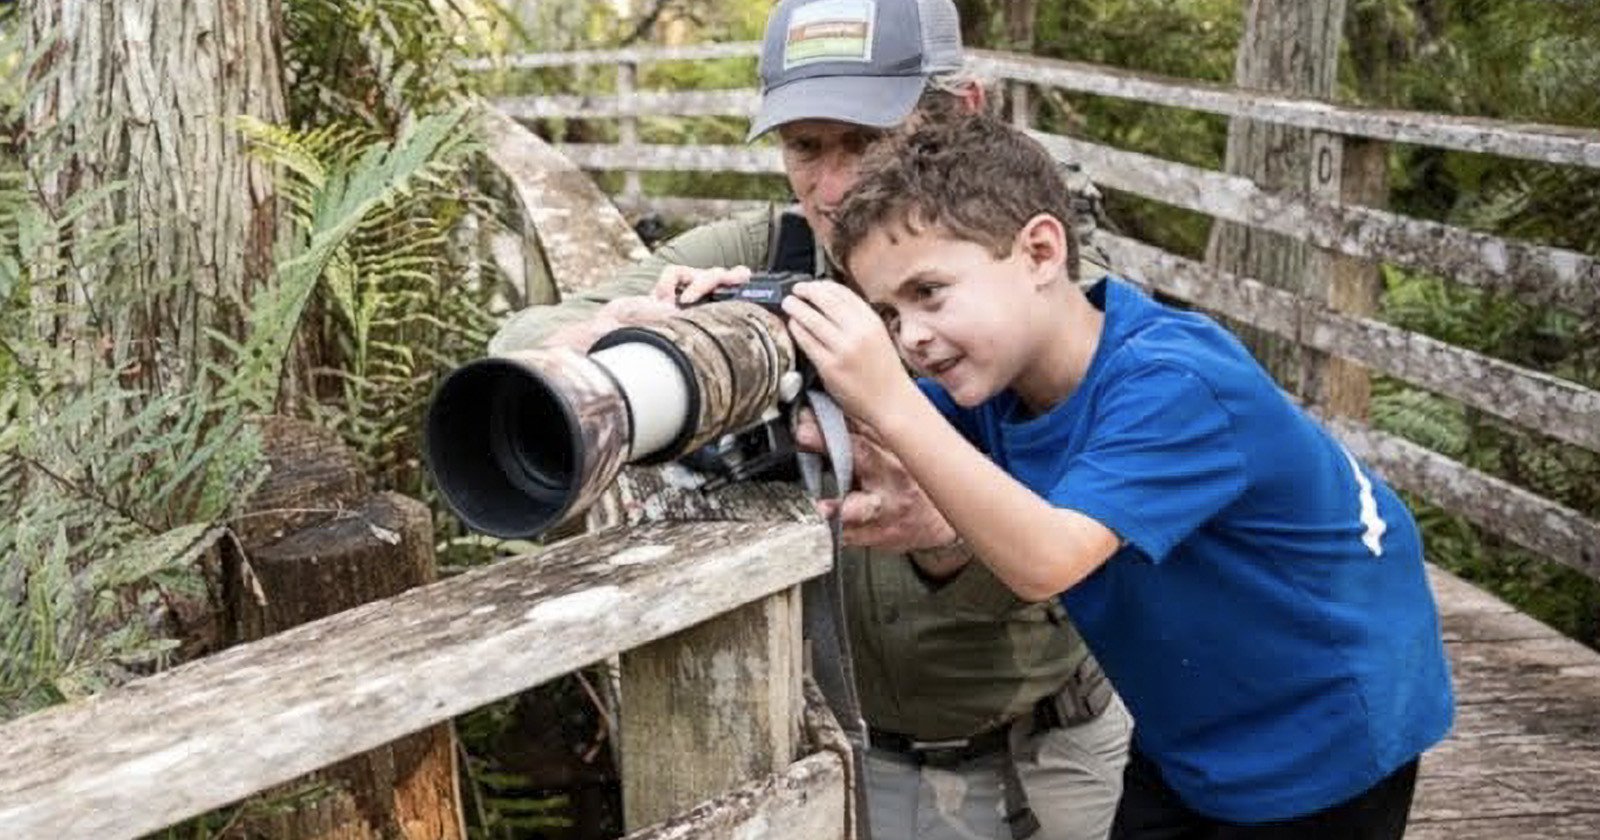 8-Year-Old Boy Becomes a Nat Geo Photographer For a Day